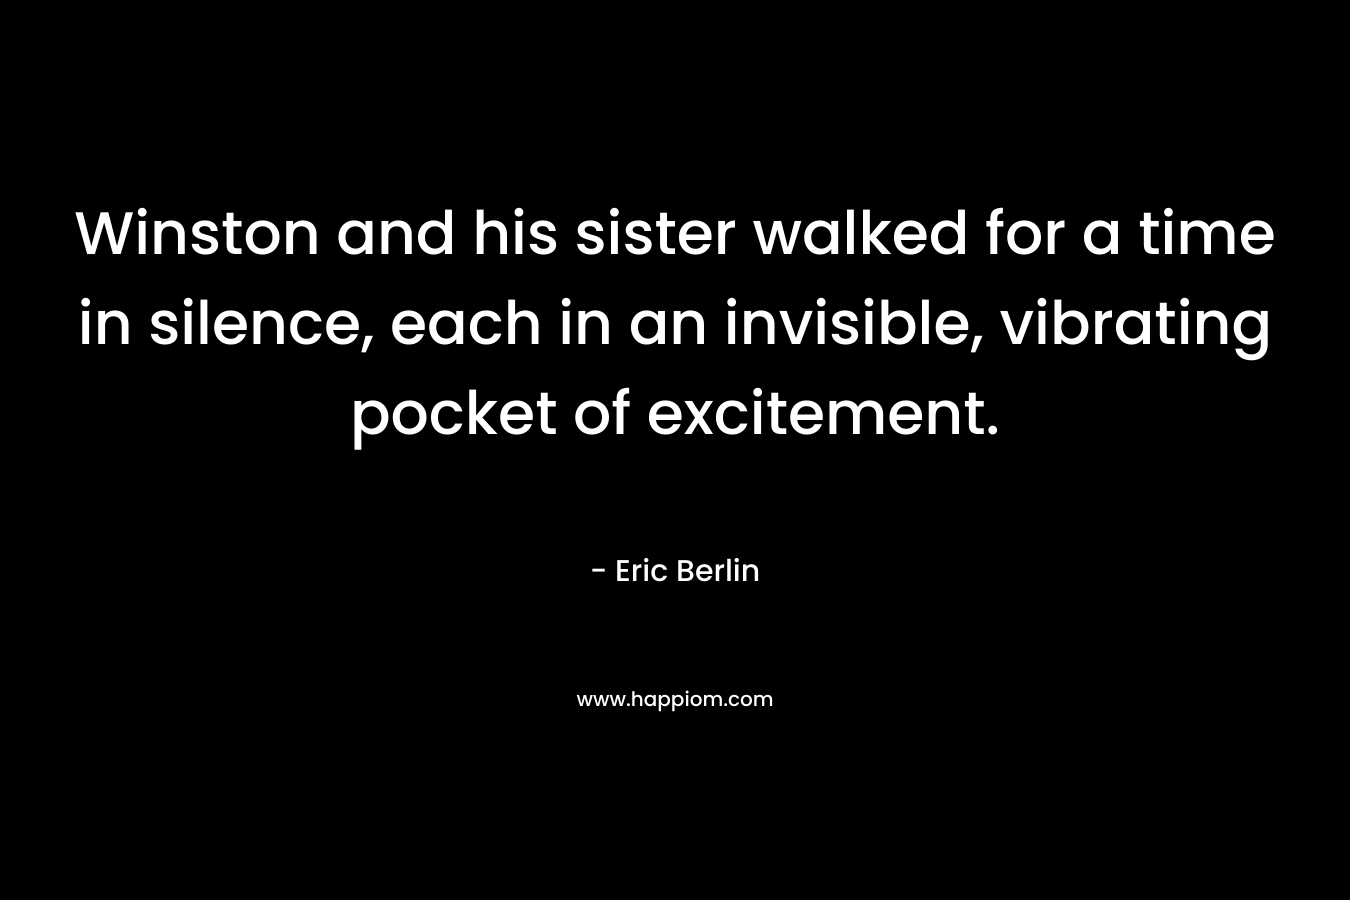 Winston and his sister walked for a time in silence, each in an invisible, vibrating pocket of excitement. – Eric Berlin